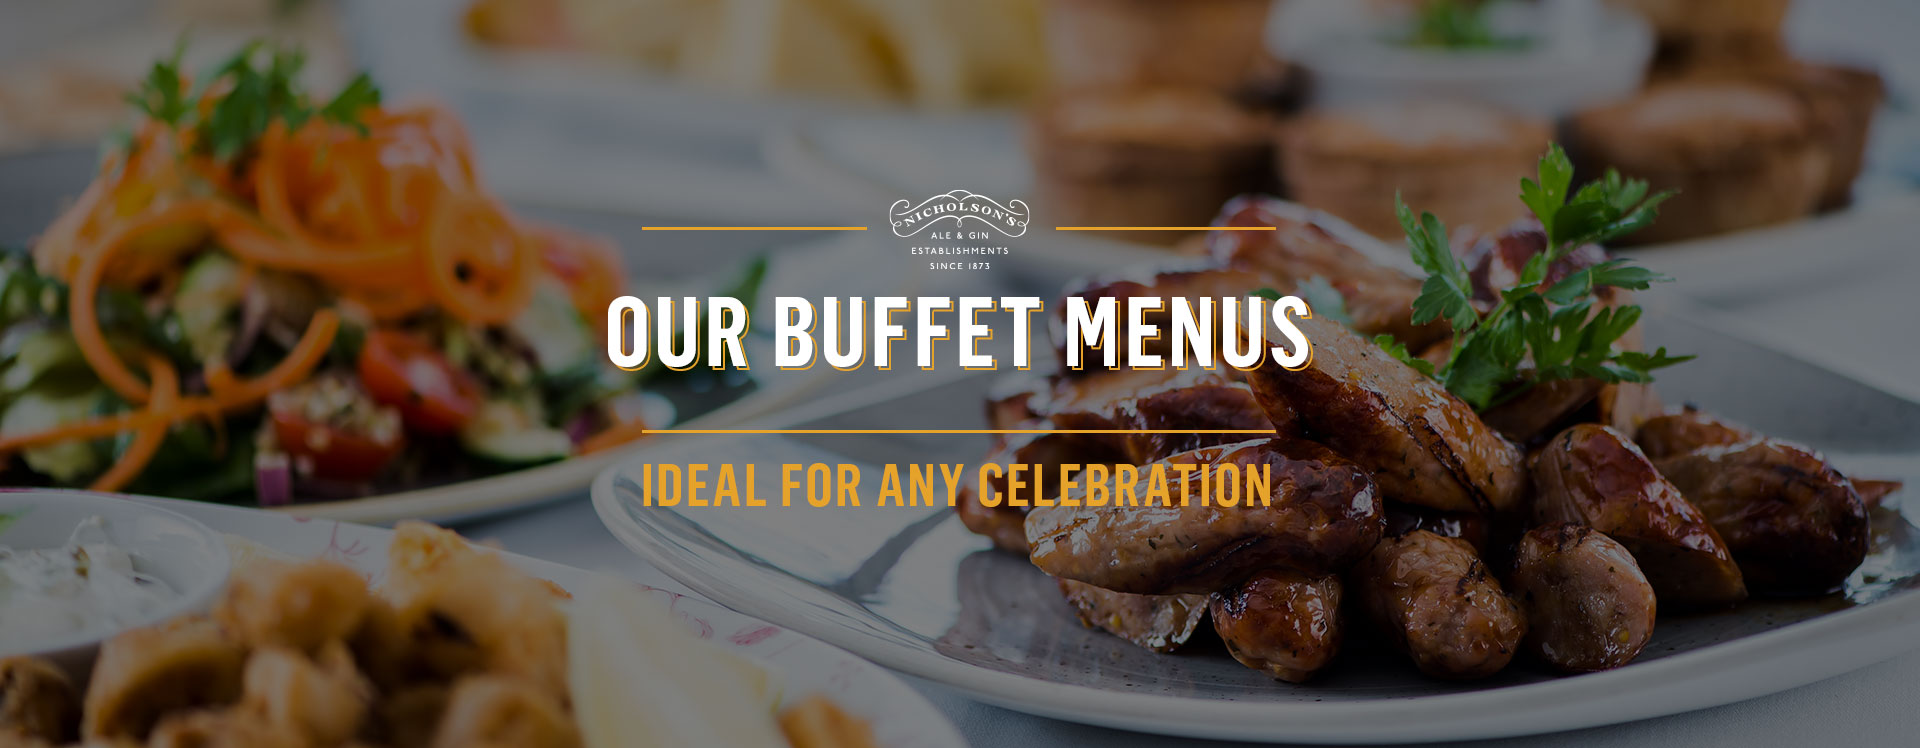 Buffet menu at The Old Wellington - Book a table